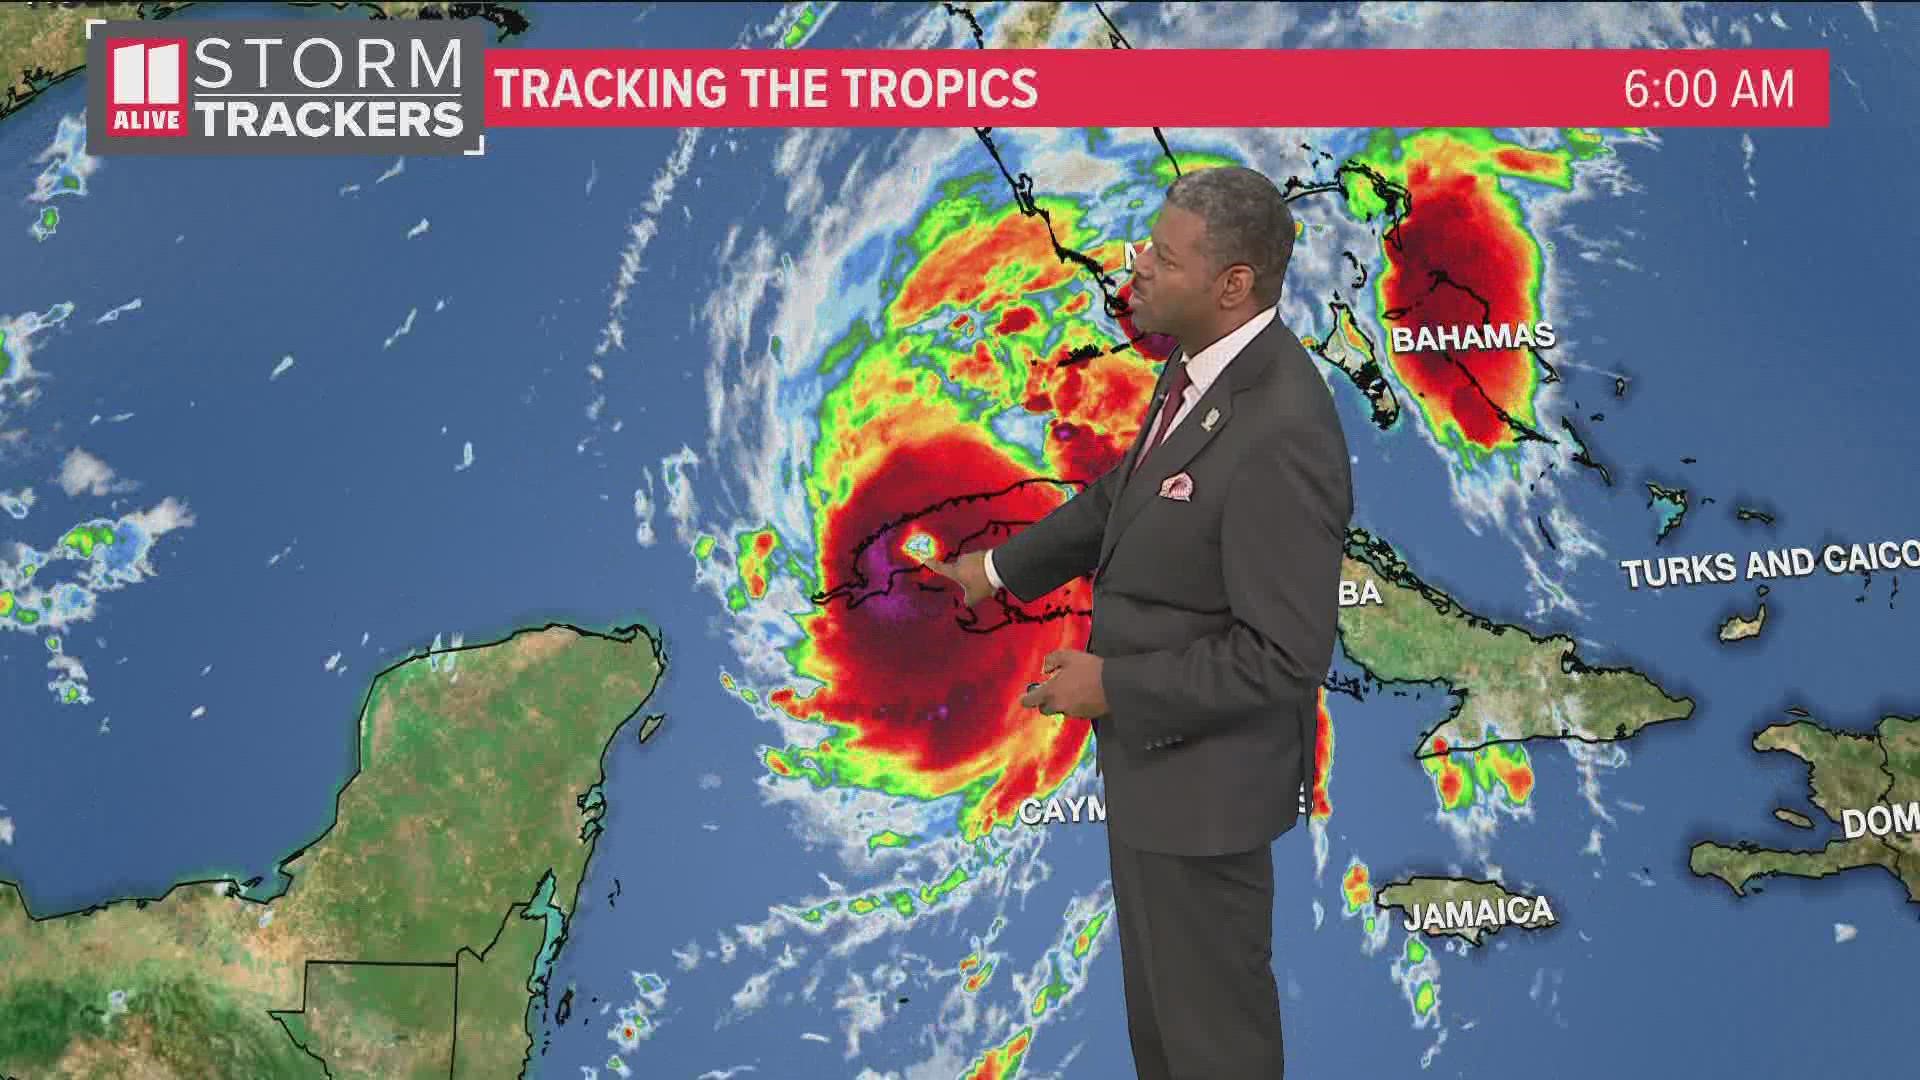 The storm is currently moving over Cuba.